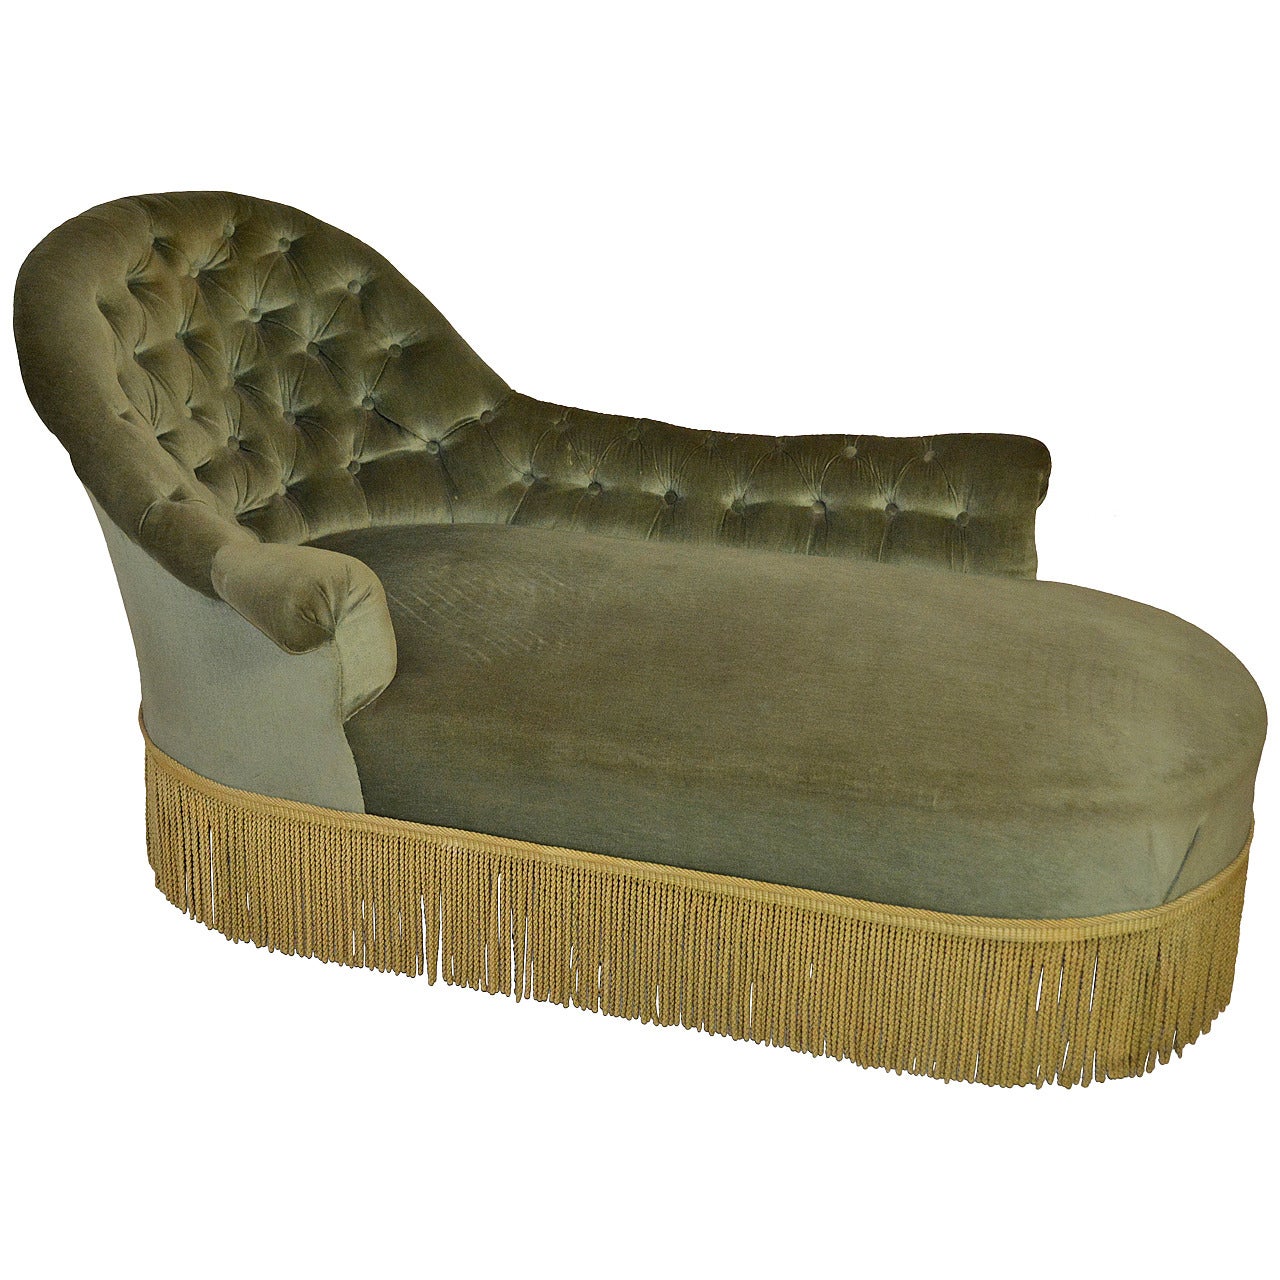 19th Century Tufted Chaise